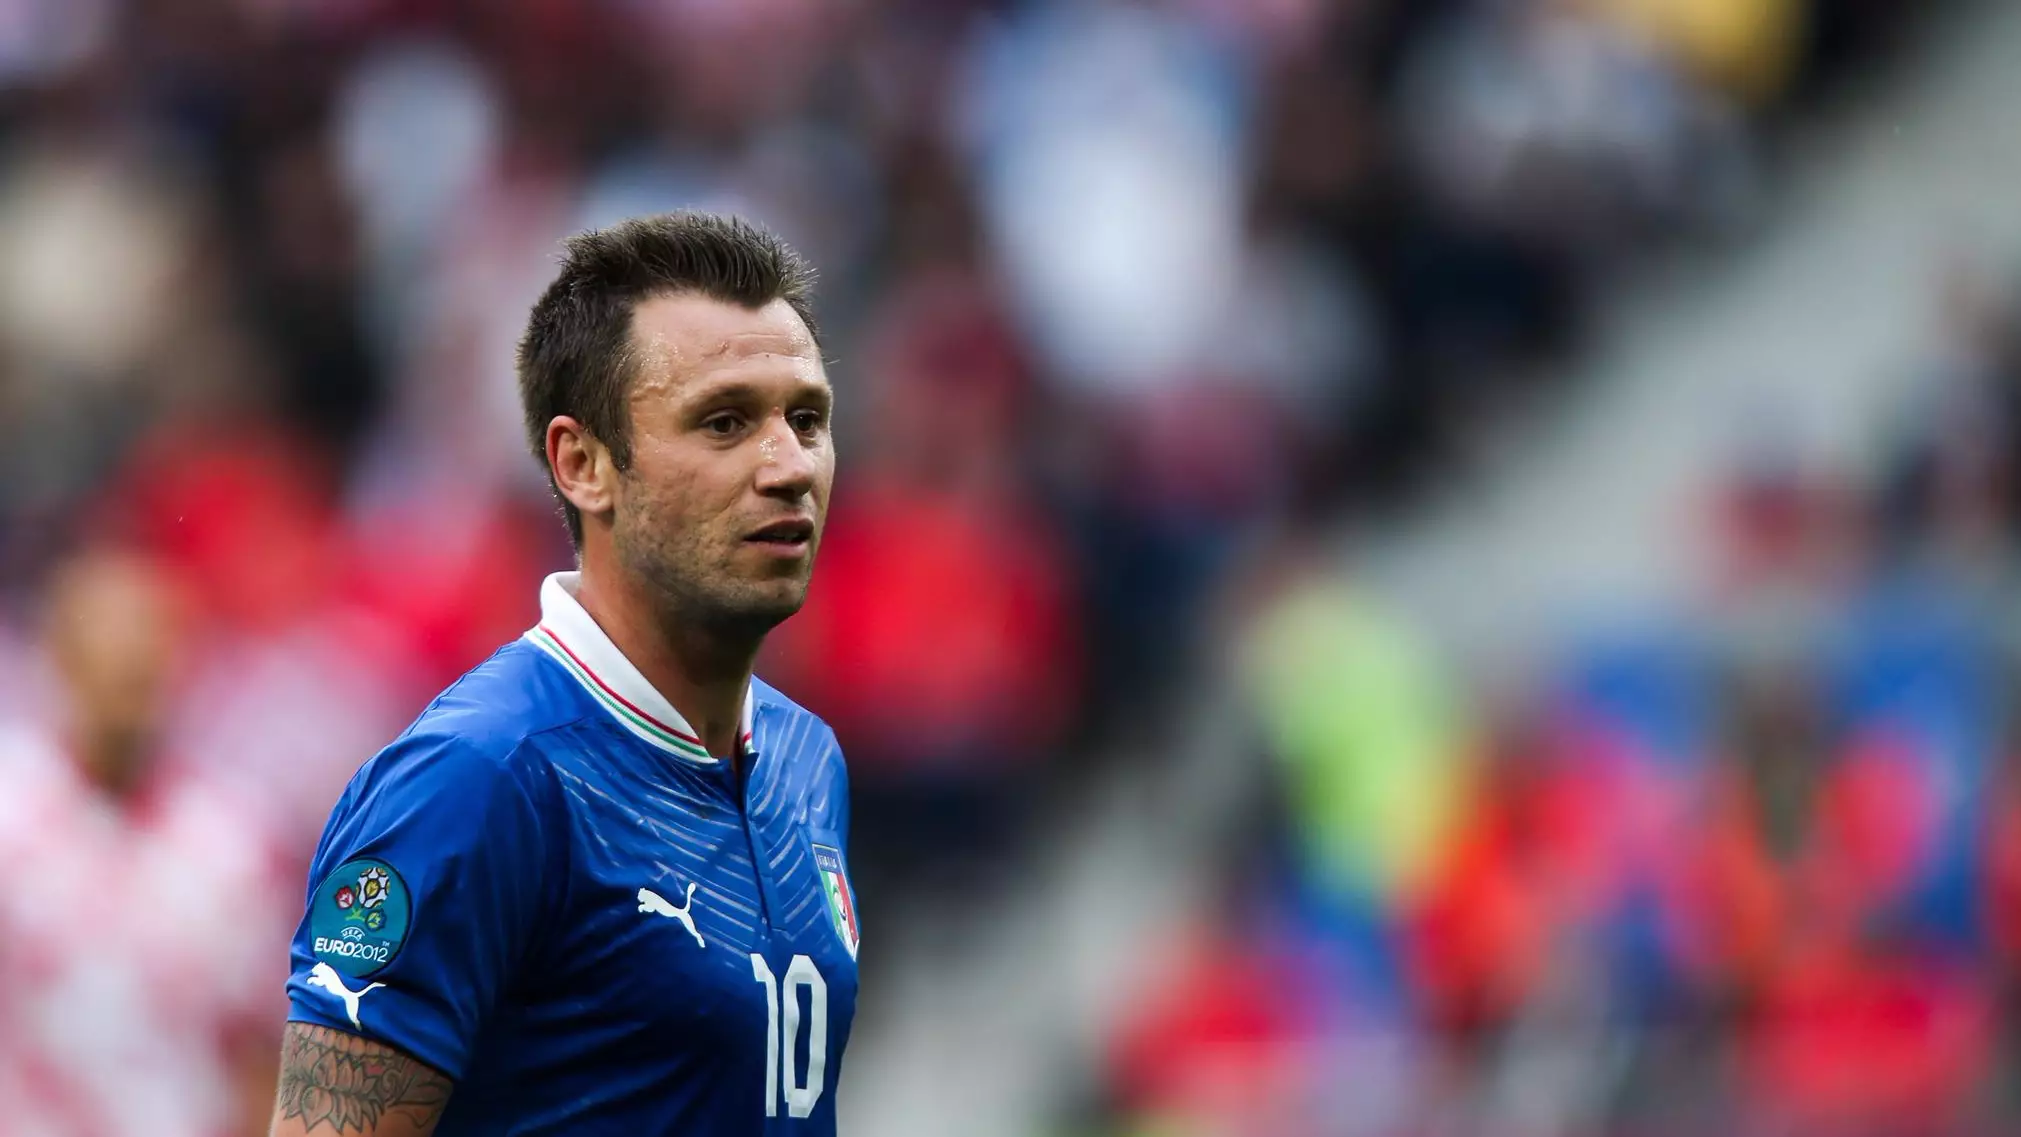 Antonio Cassano Retires Just Days After Signing For A New Club